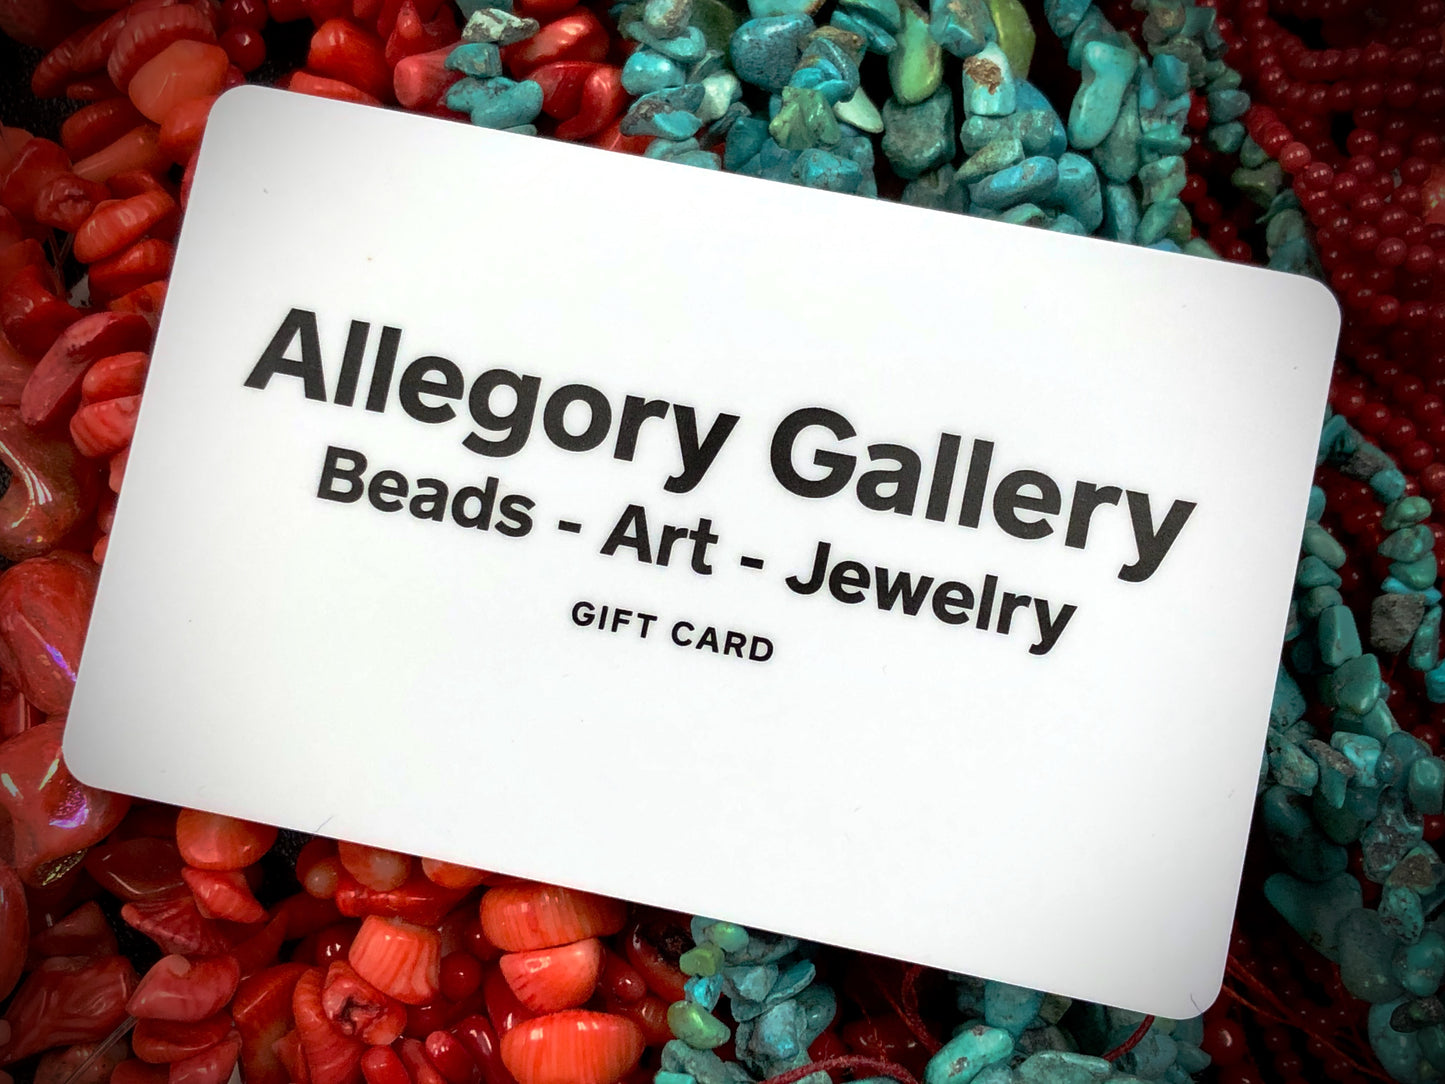 Allegory Gallery Gift Card